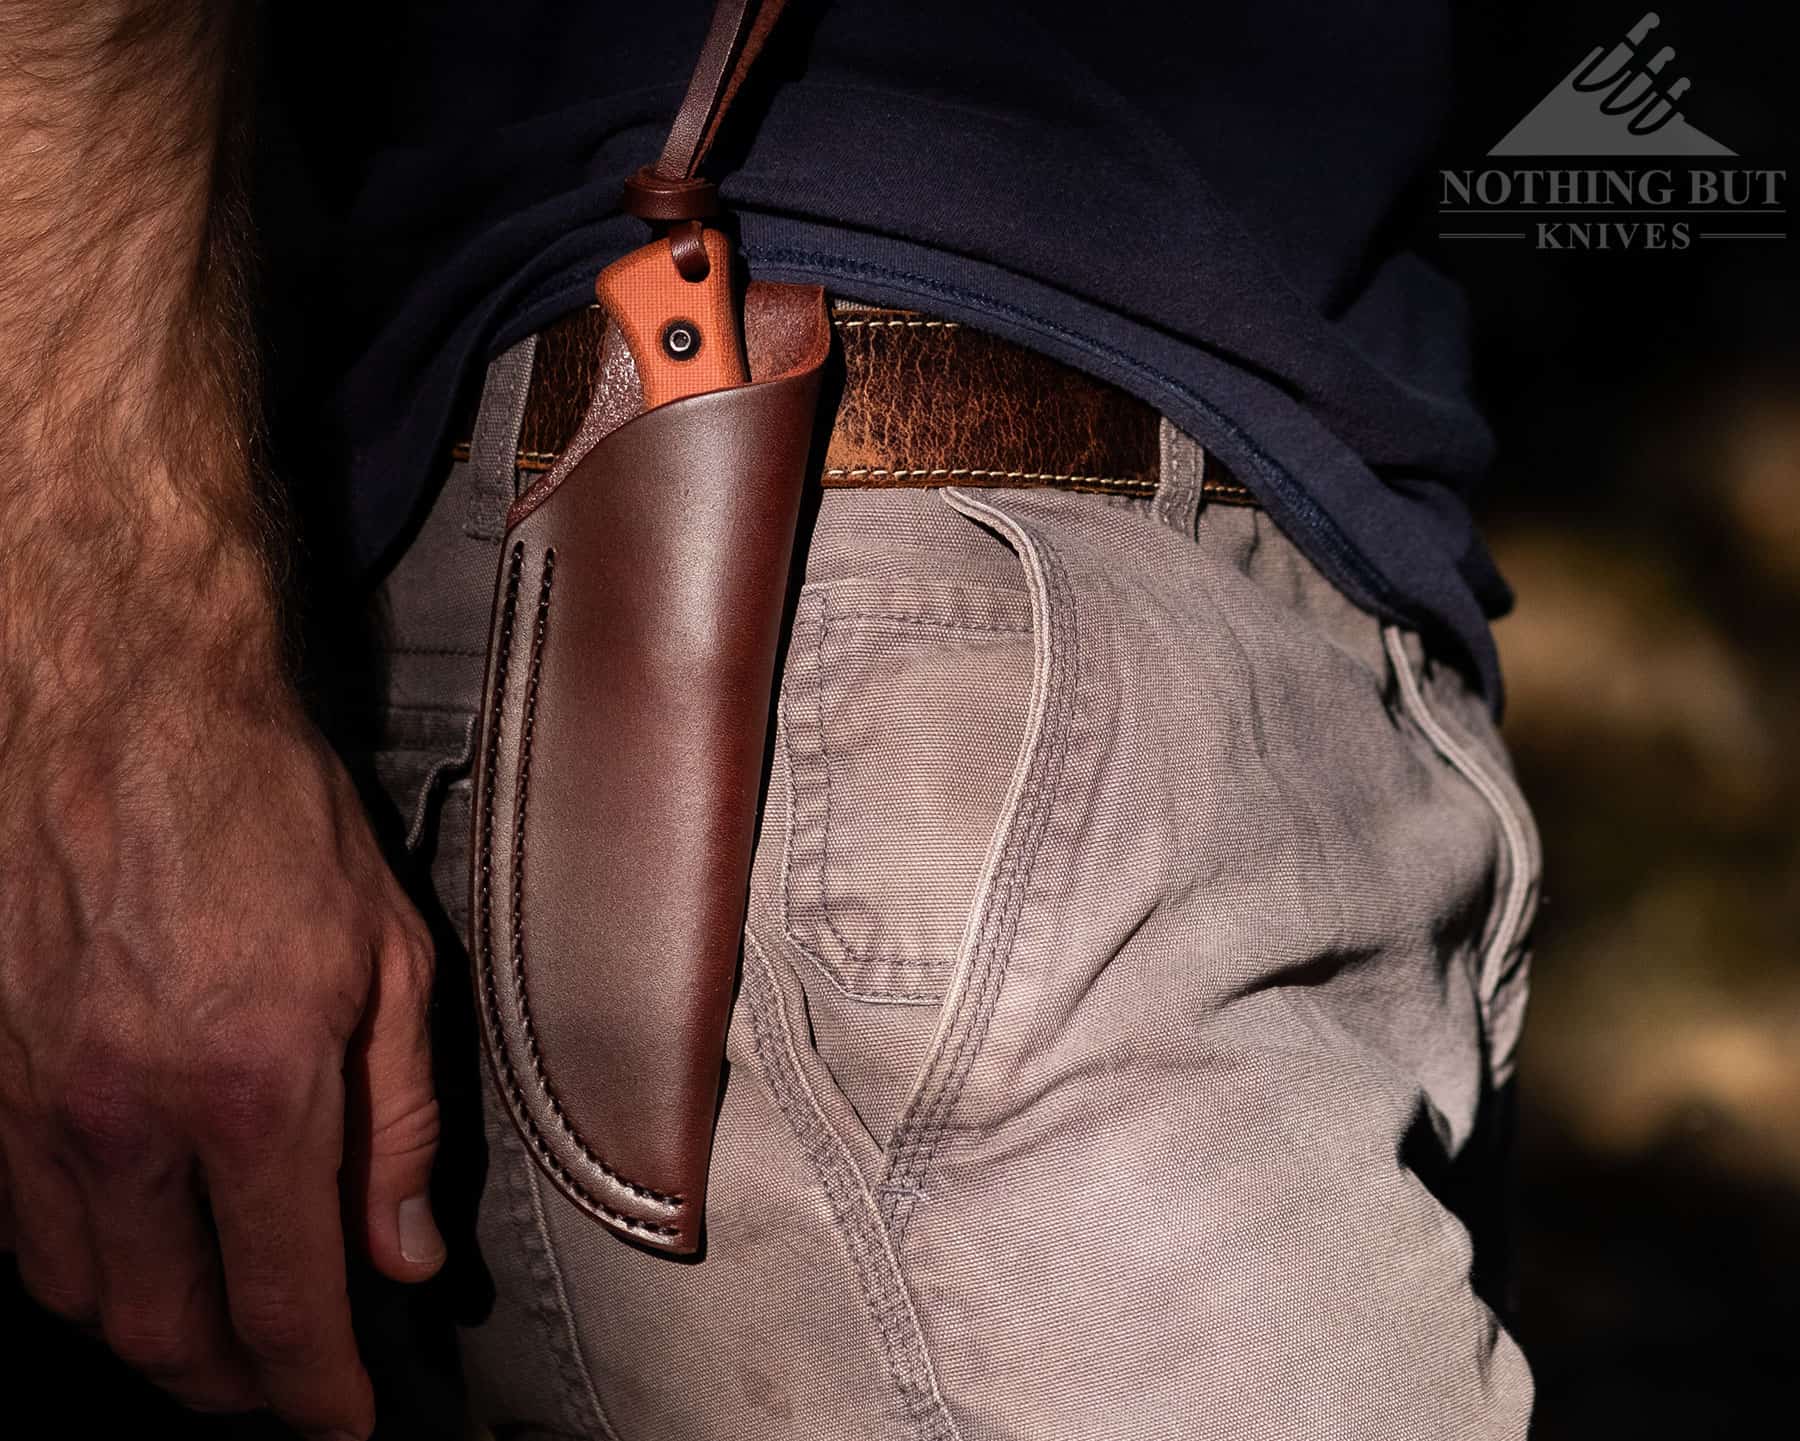 I love the way the sheath sits on the belt. It’s a pretty compact knife, and the leather sheath leans into that.